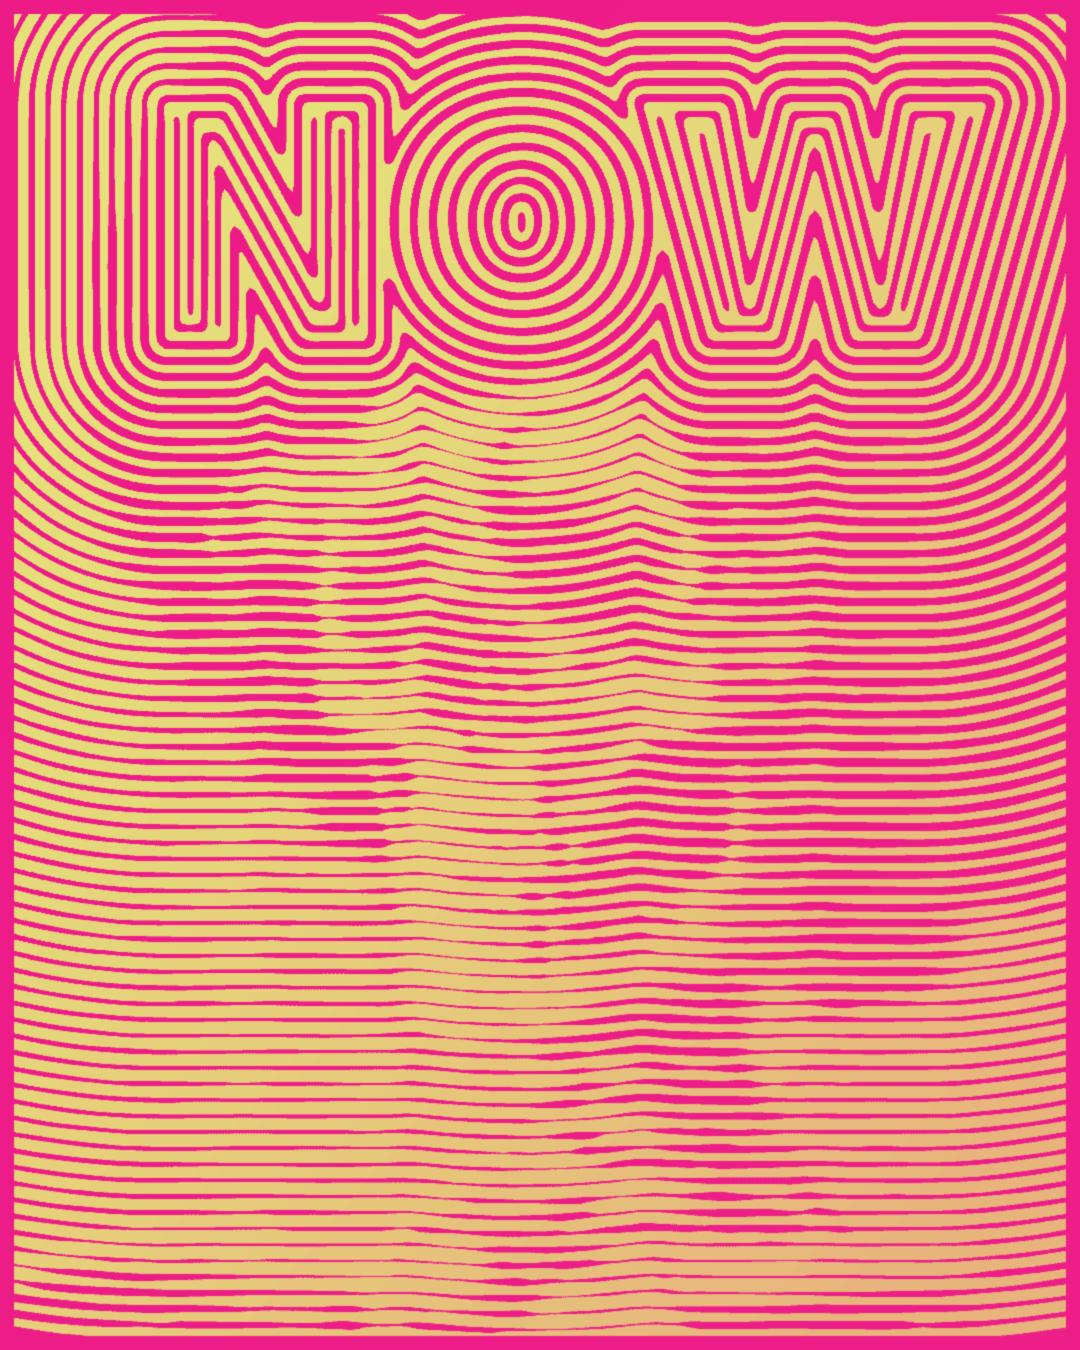 Abstract line pattern around the word 'now' revealing skeleton